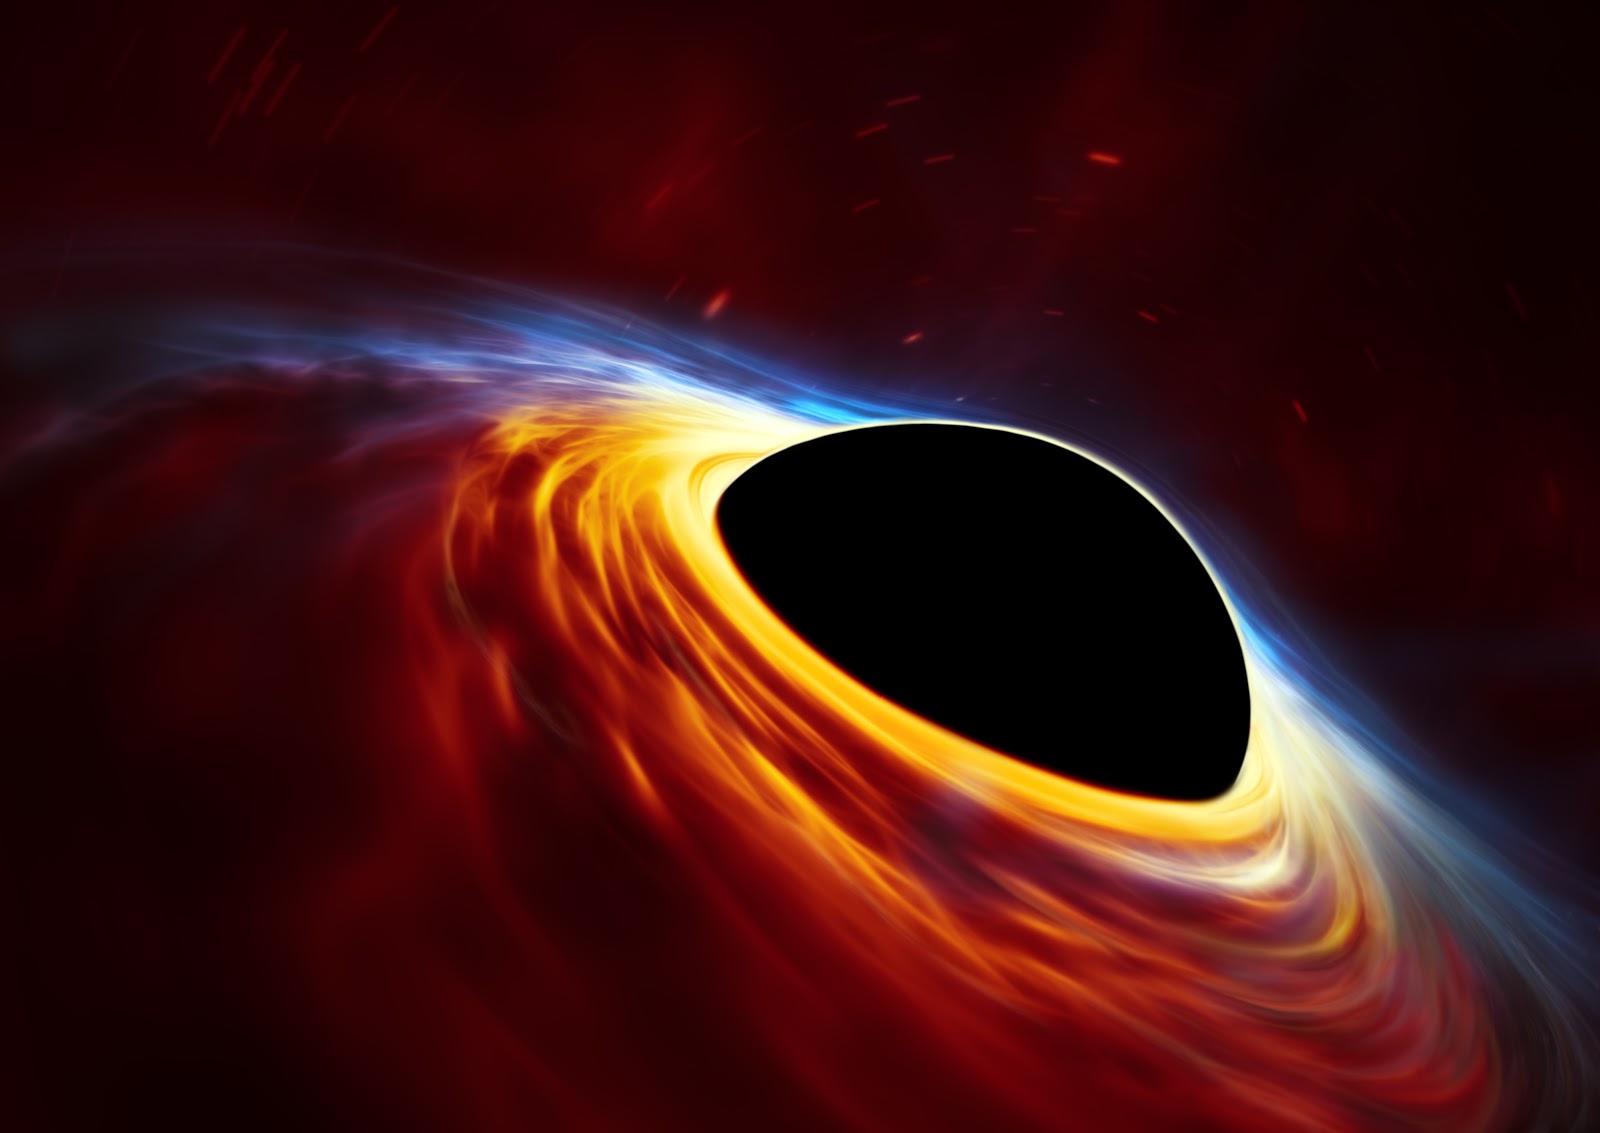 Spinning Black Hole Swallowing Star Explains Superluminous Event | Earth Blog